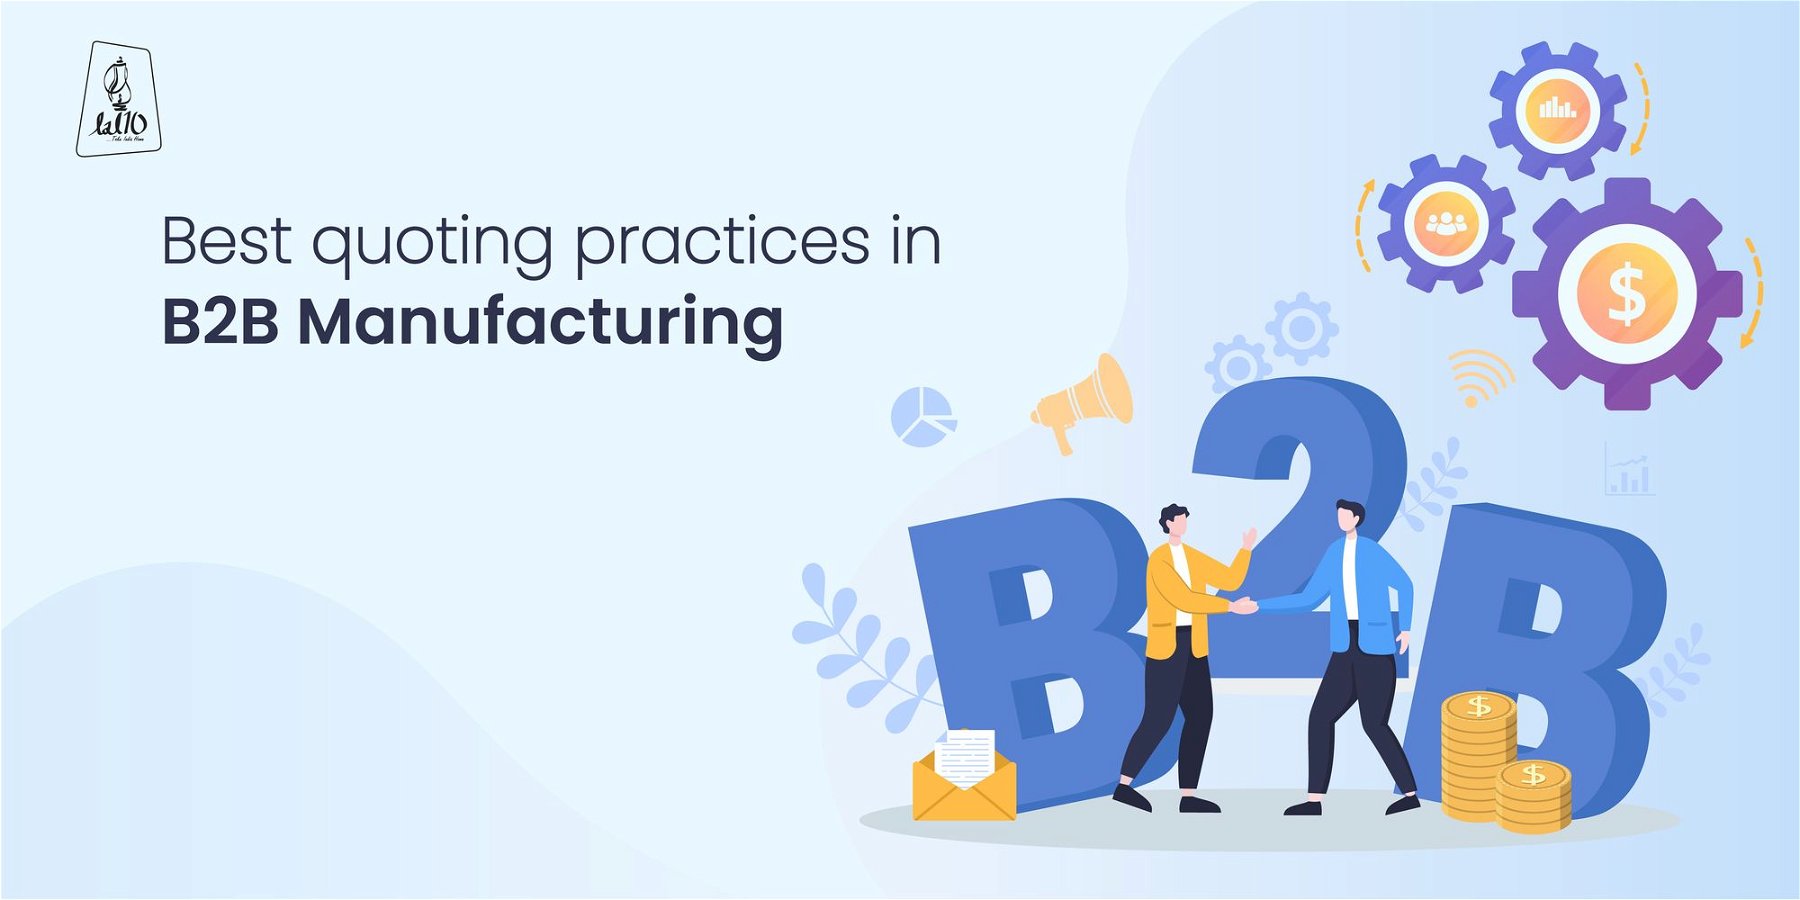 Best quoting practices in B2B manufacturing